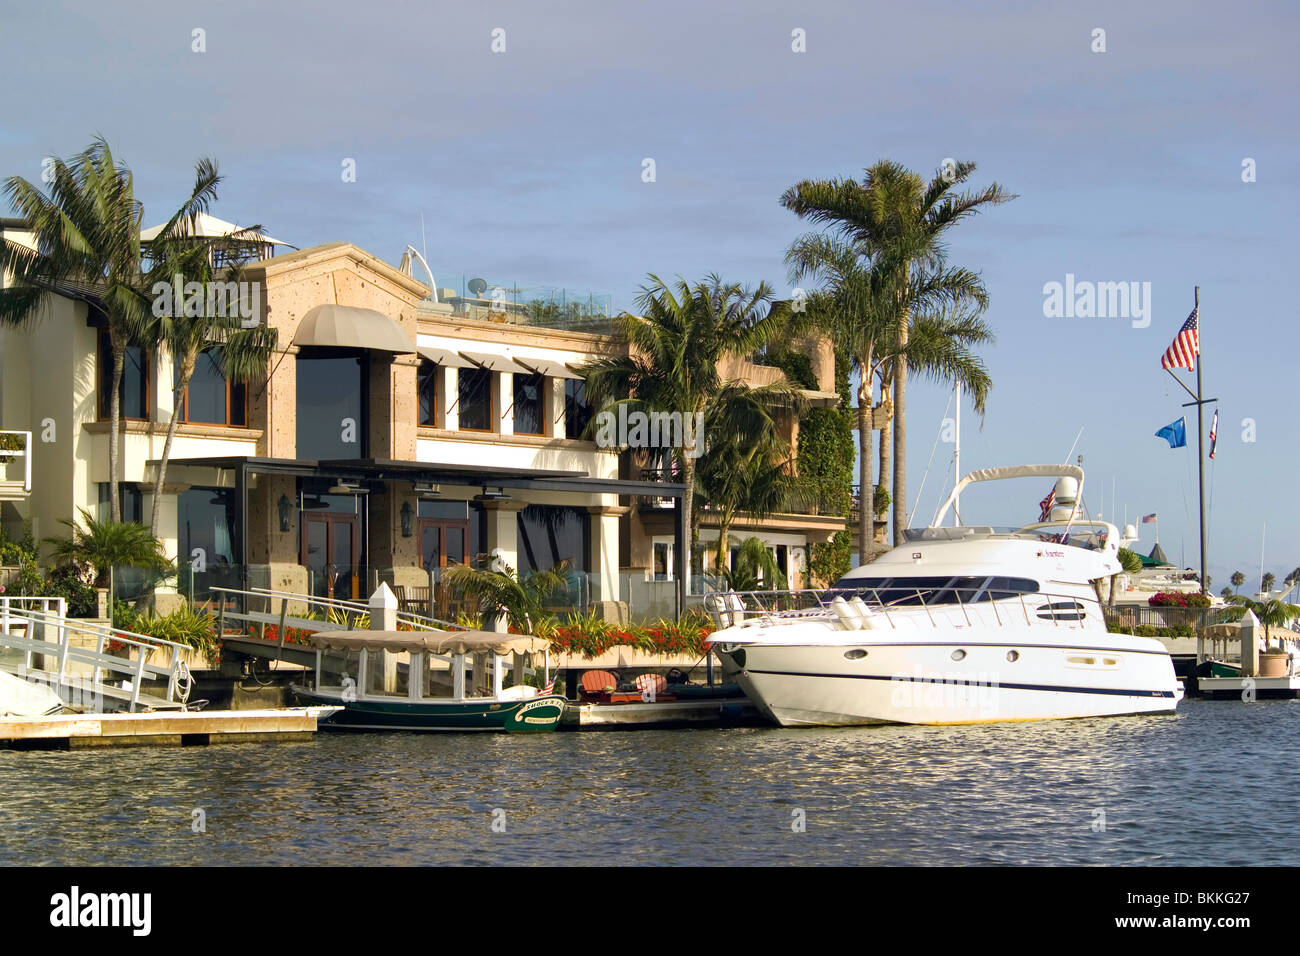 The luxurious yachts and multimillion-dollar waterfront homes of wealthy residents line Newport Harbor in Newport Beach, Southern California, USA. Stock Photo